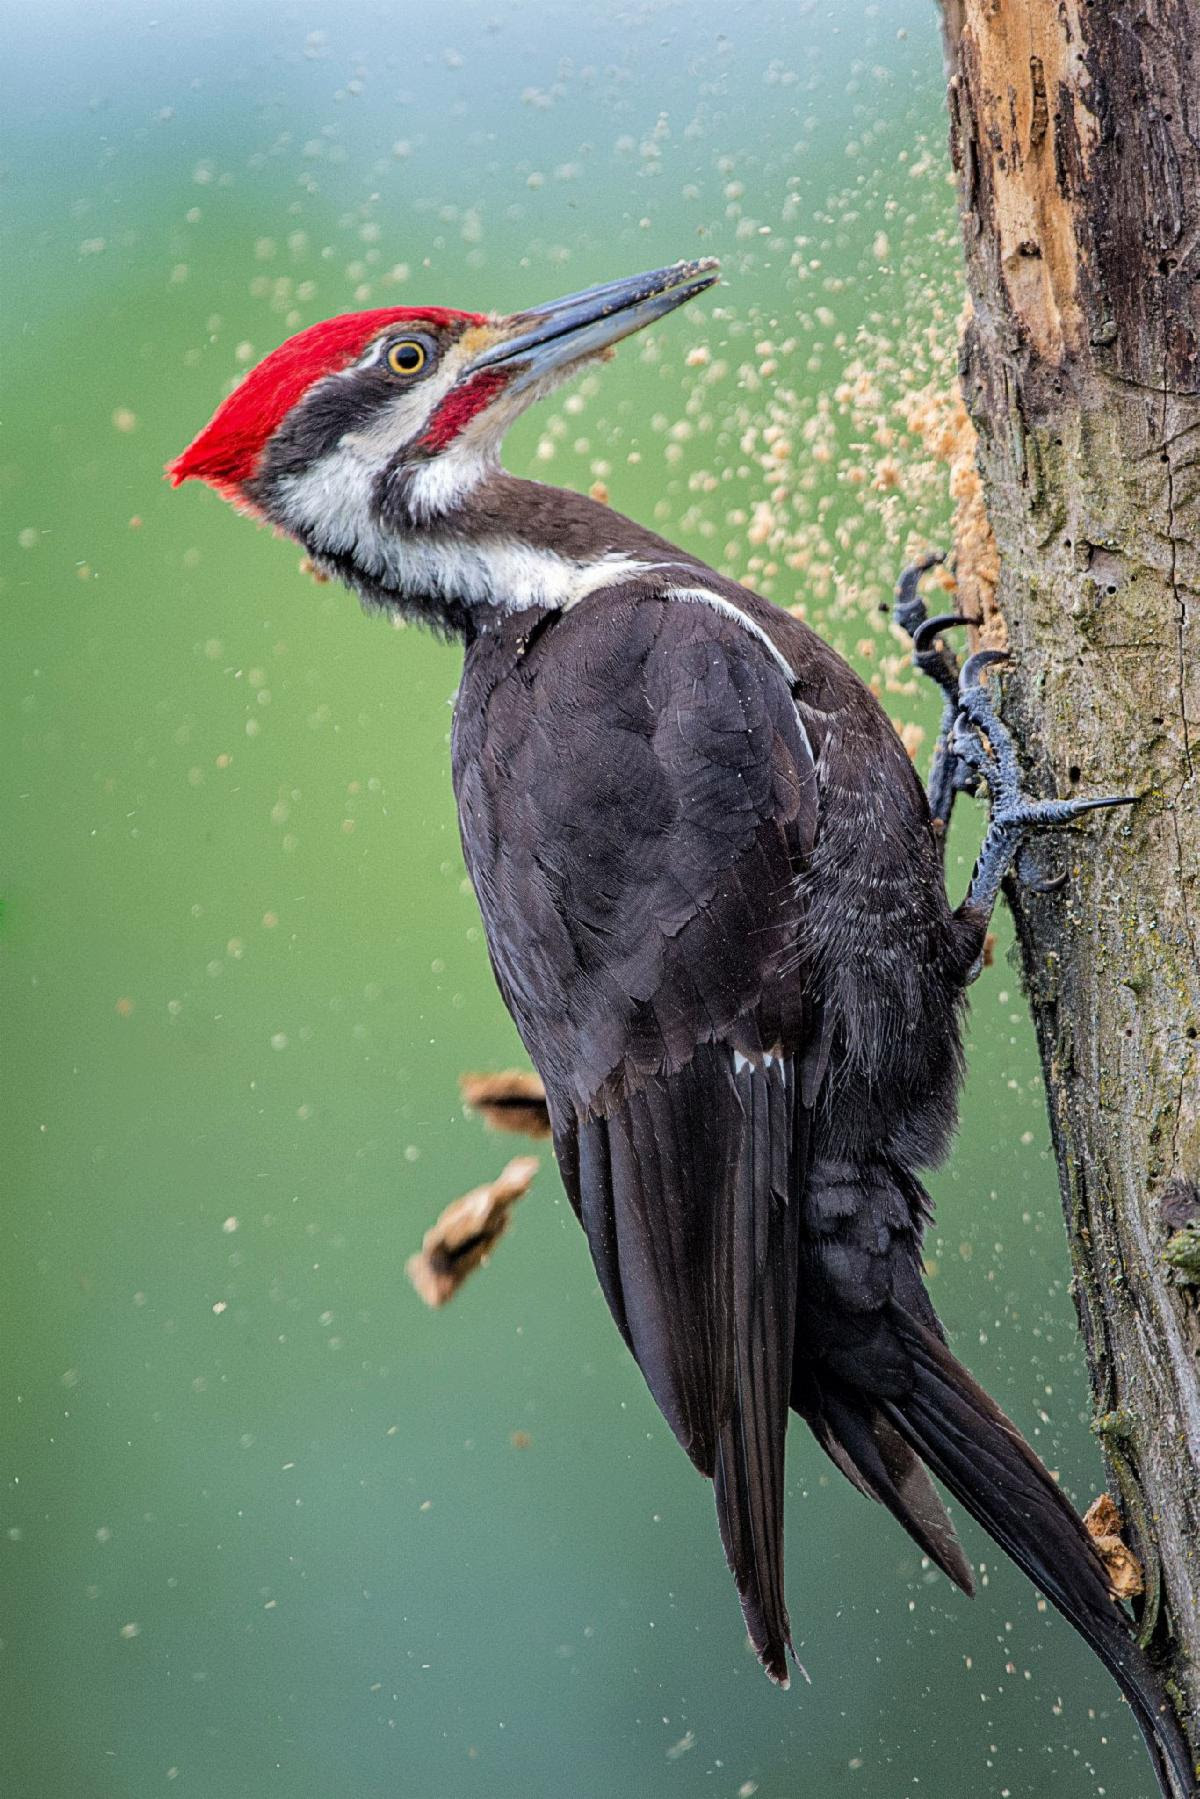 Pileated Woodpecker pecking a tree with sawdust flying